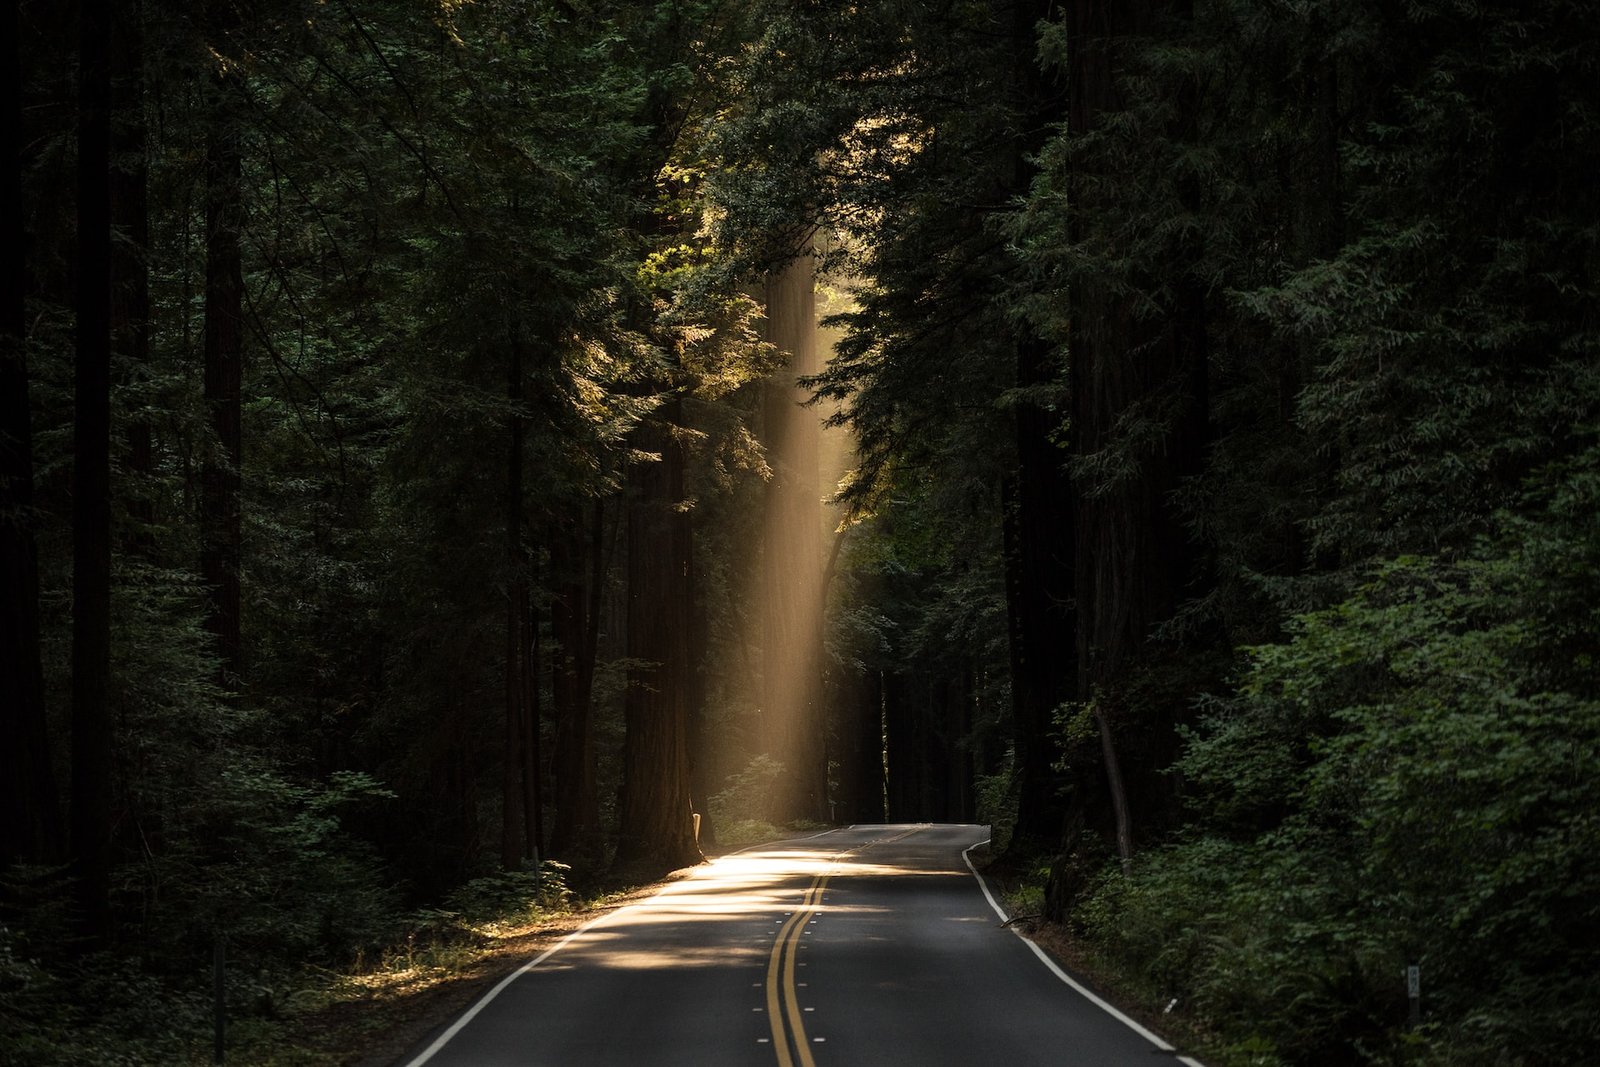 Image of a road leading into trees, with the sun shining on a part of it.